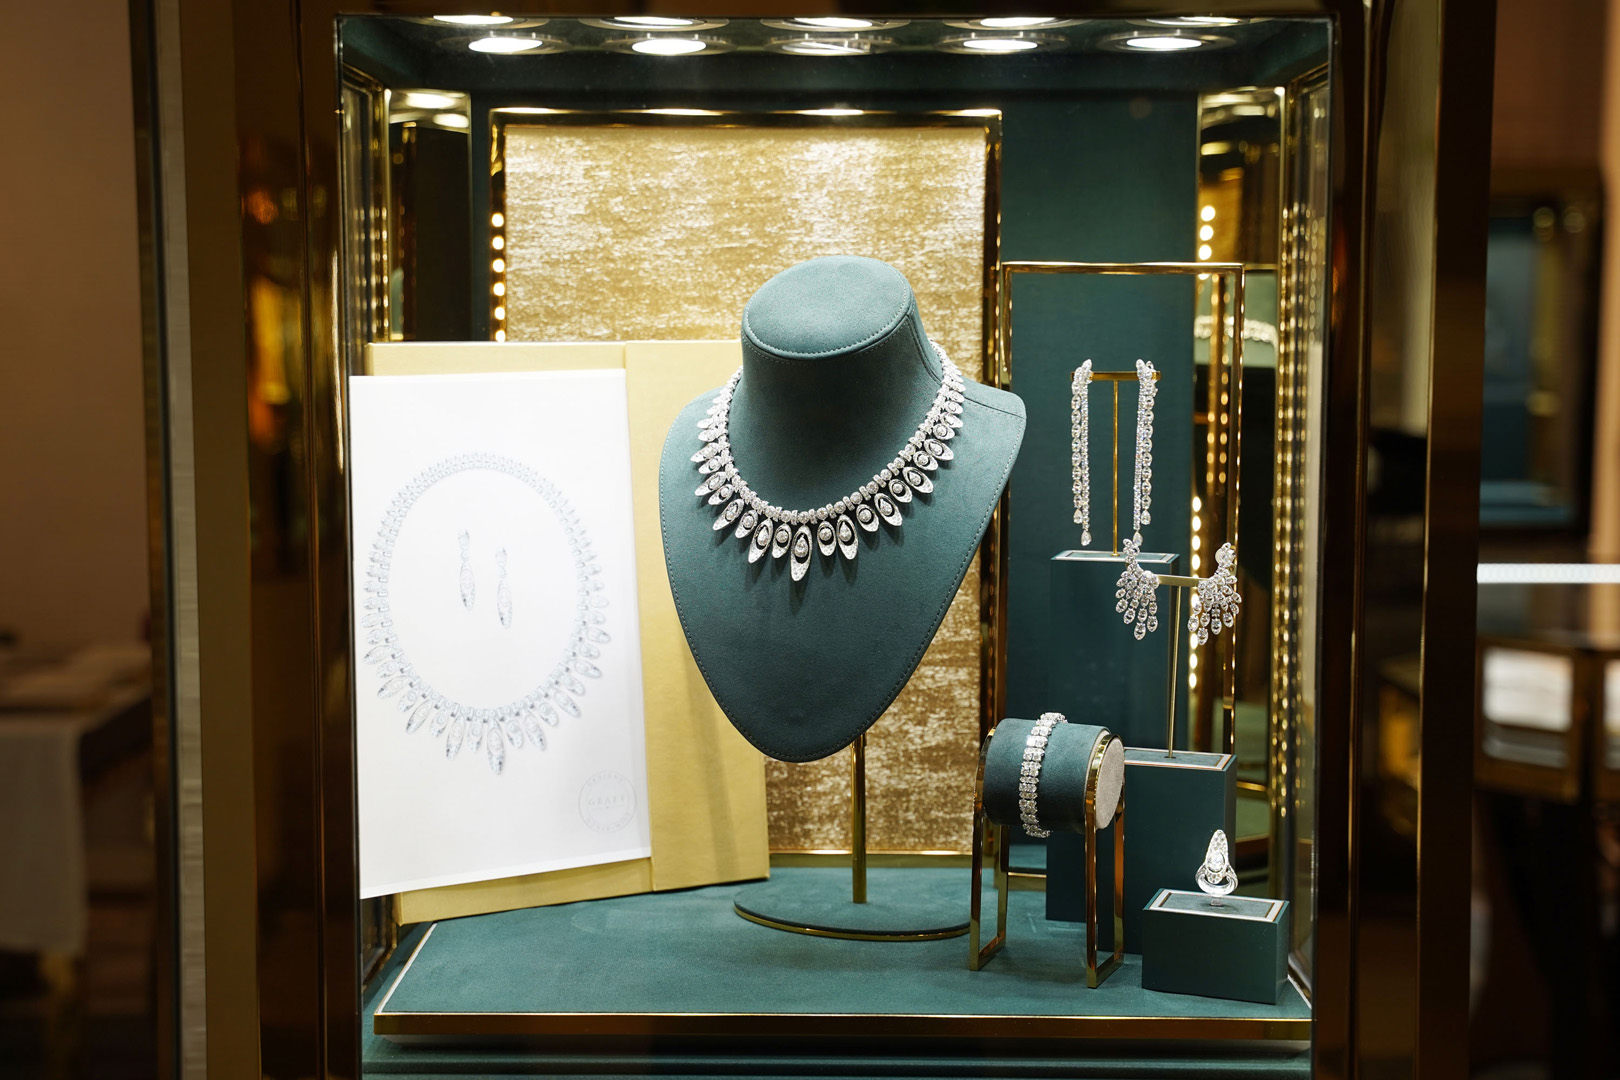 Graff diamond necklace in a display case